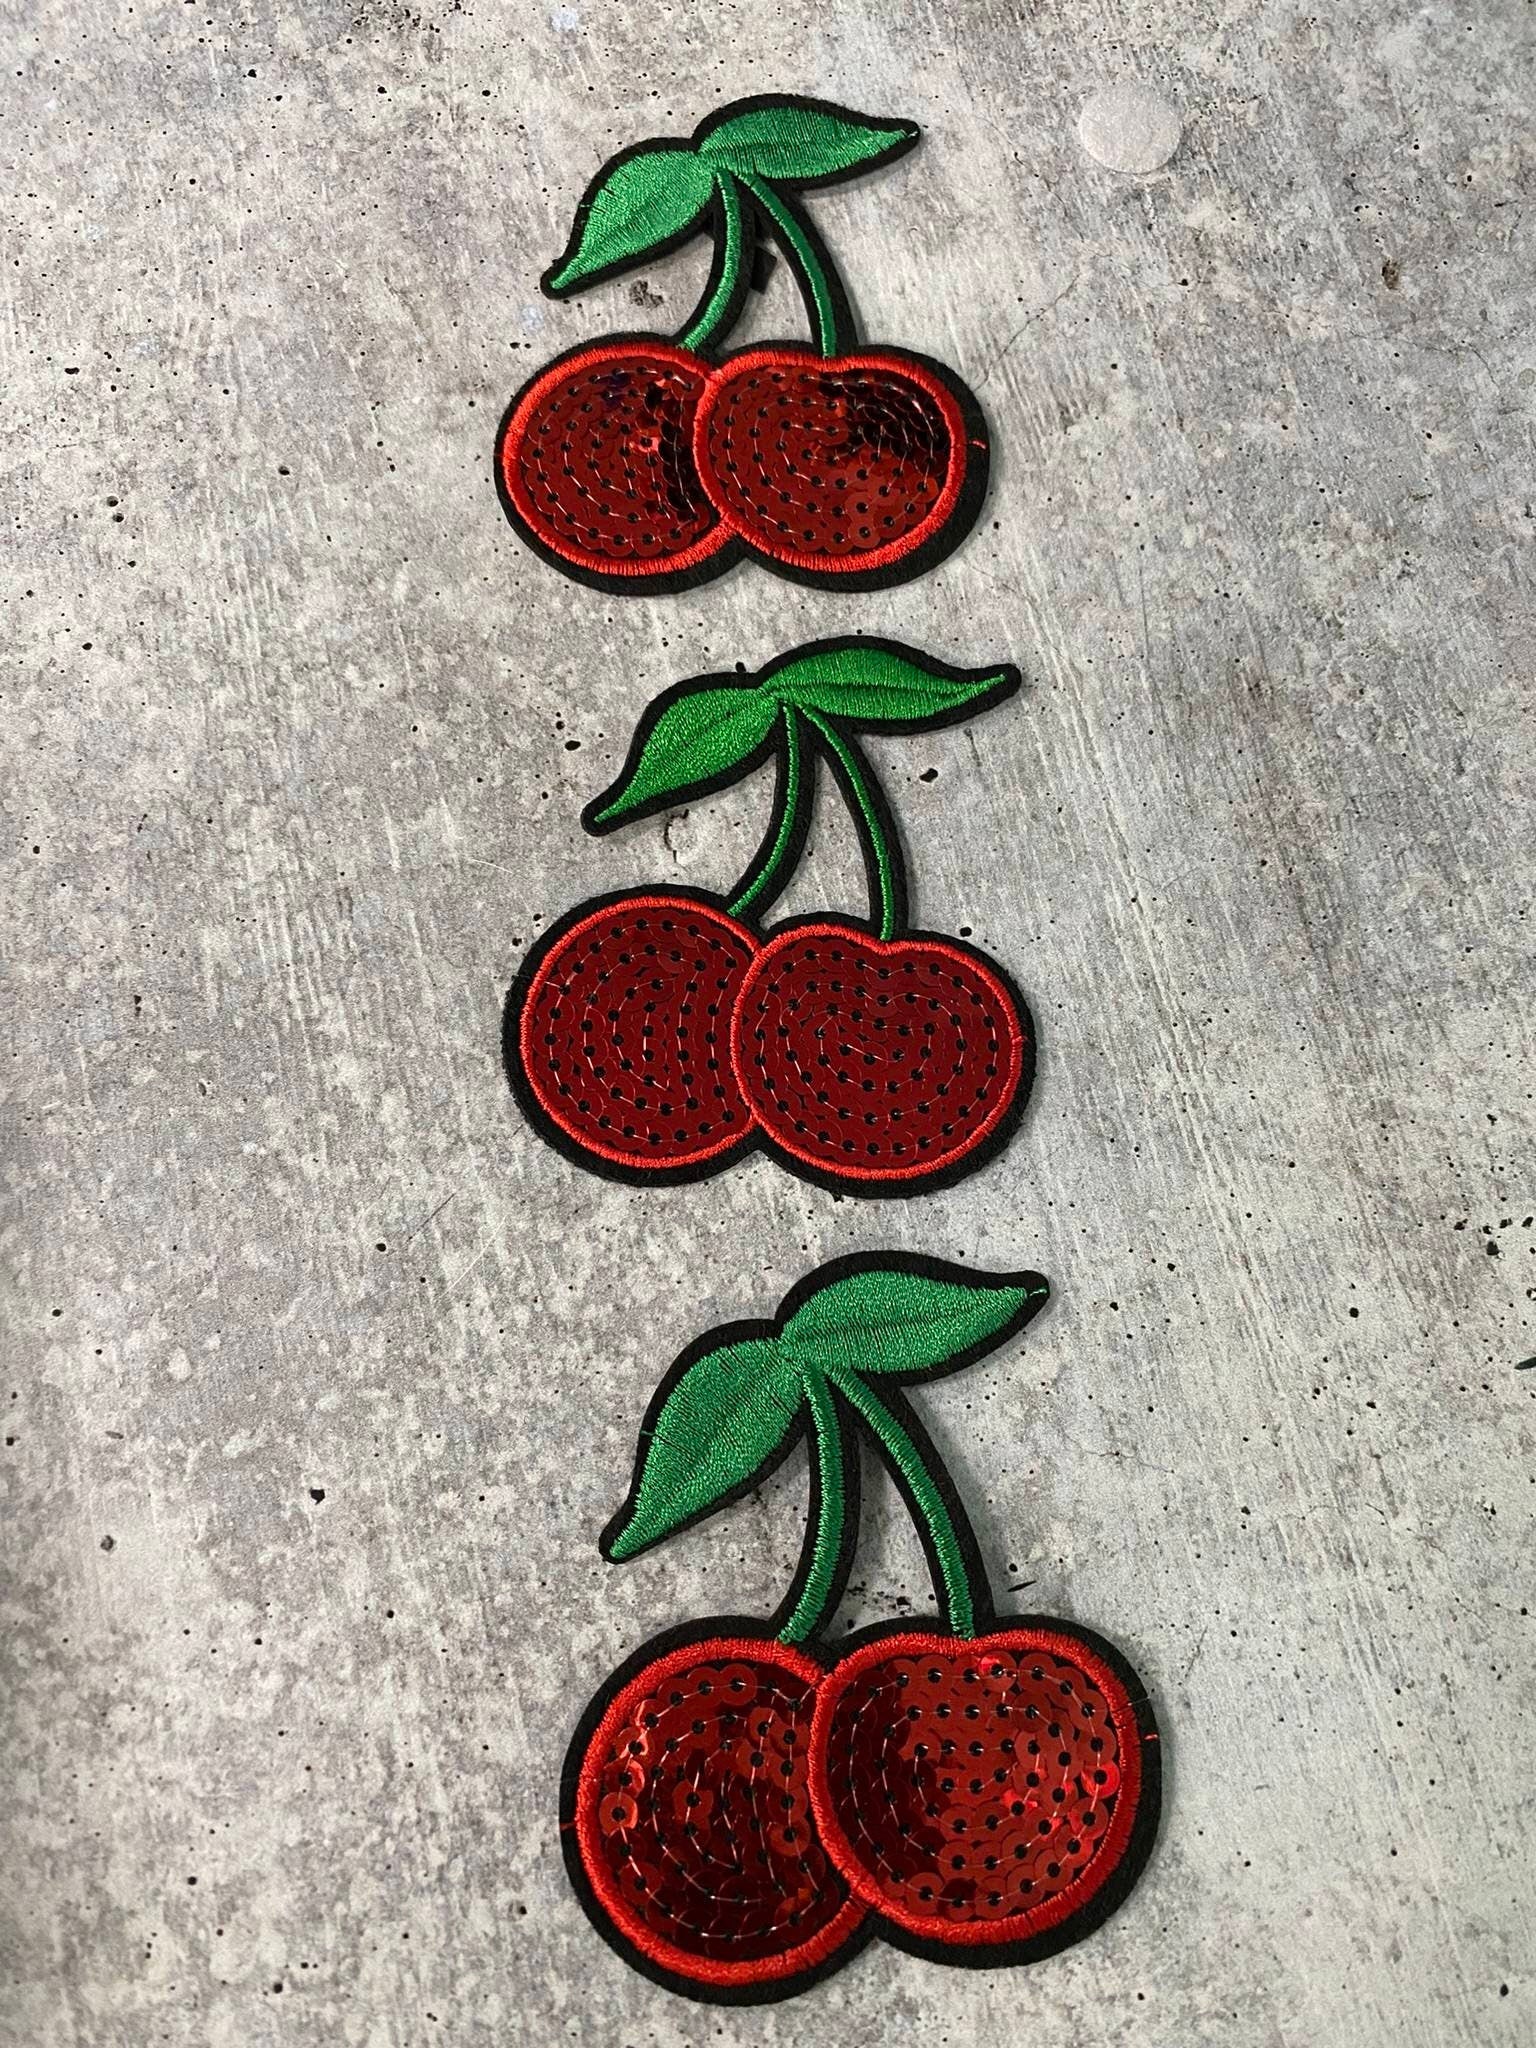 New, 2-pc Set, "Sparkling Cherry Patch" Embroidery and Sequins Fruit Design for Clothing and Accessories, Iron-on Applique, Size 2", Novelty